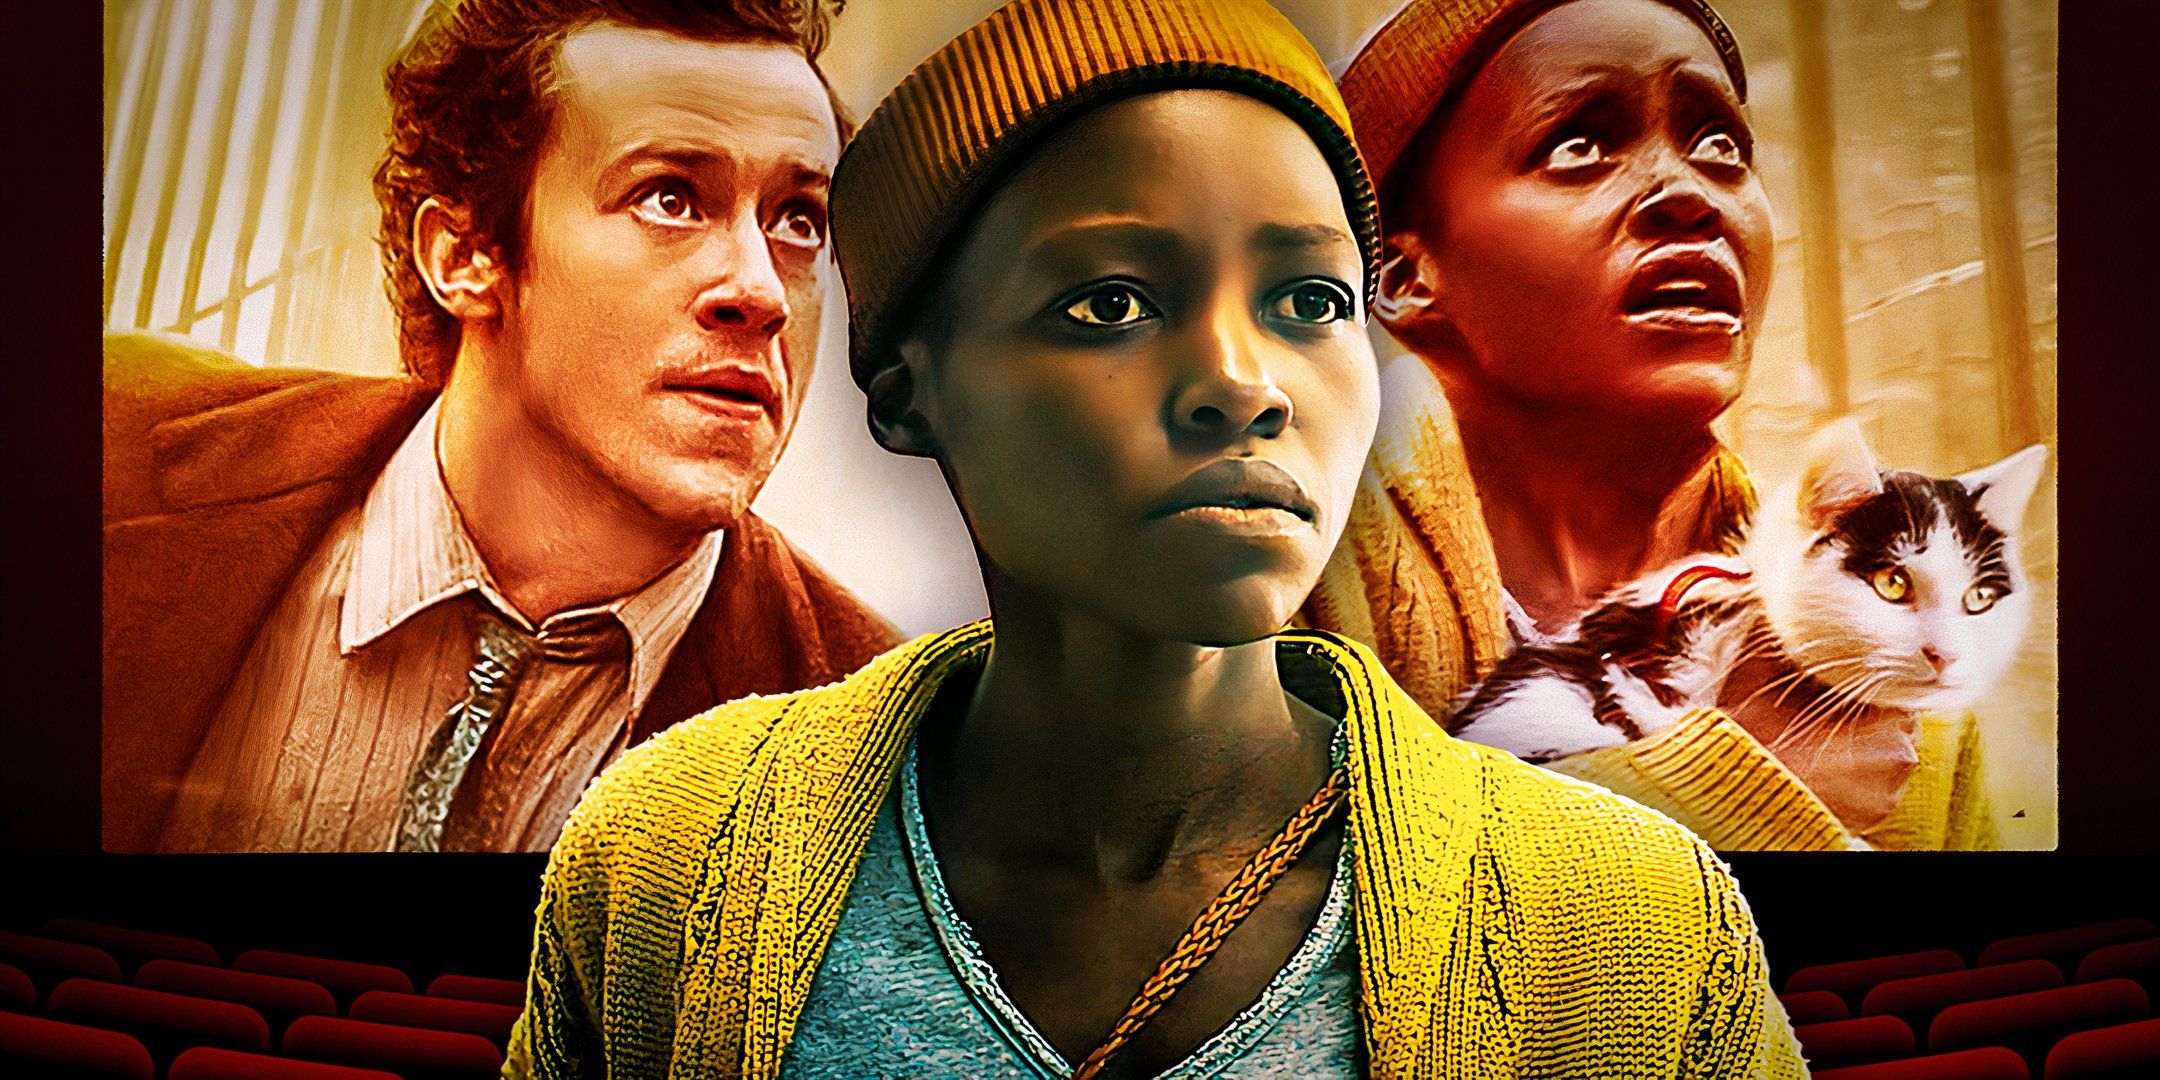 Lupita Nyong'o as Samira from A Quiet Place Day One in theaters